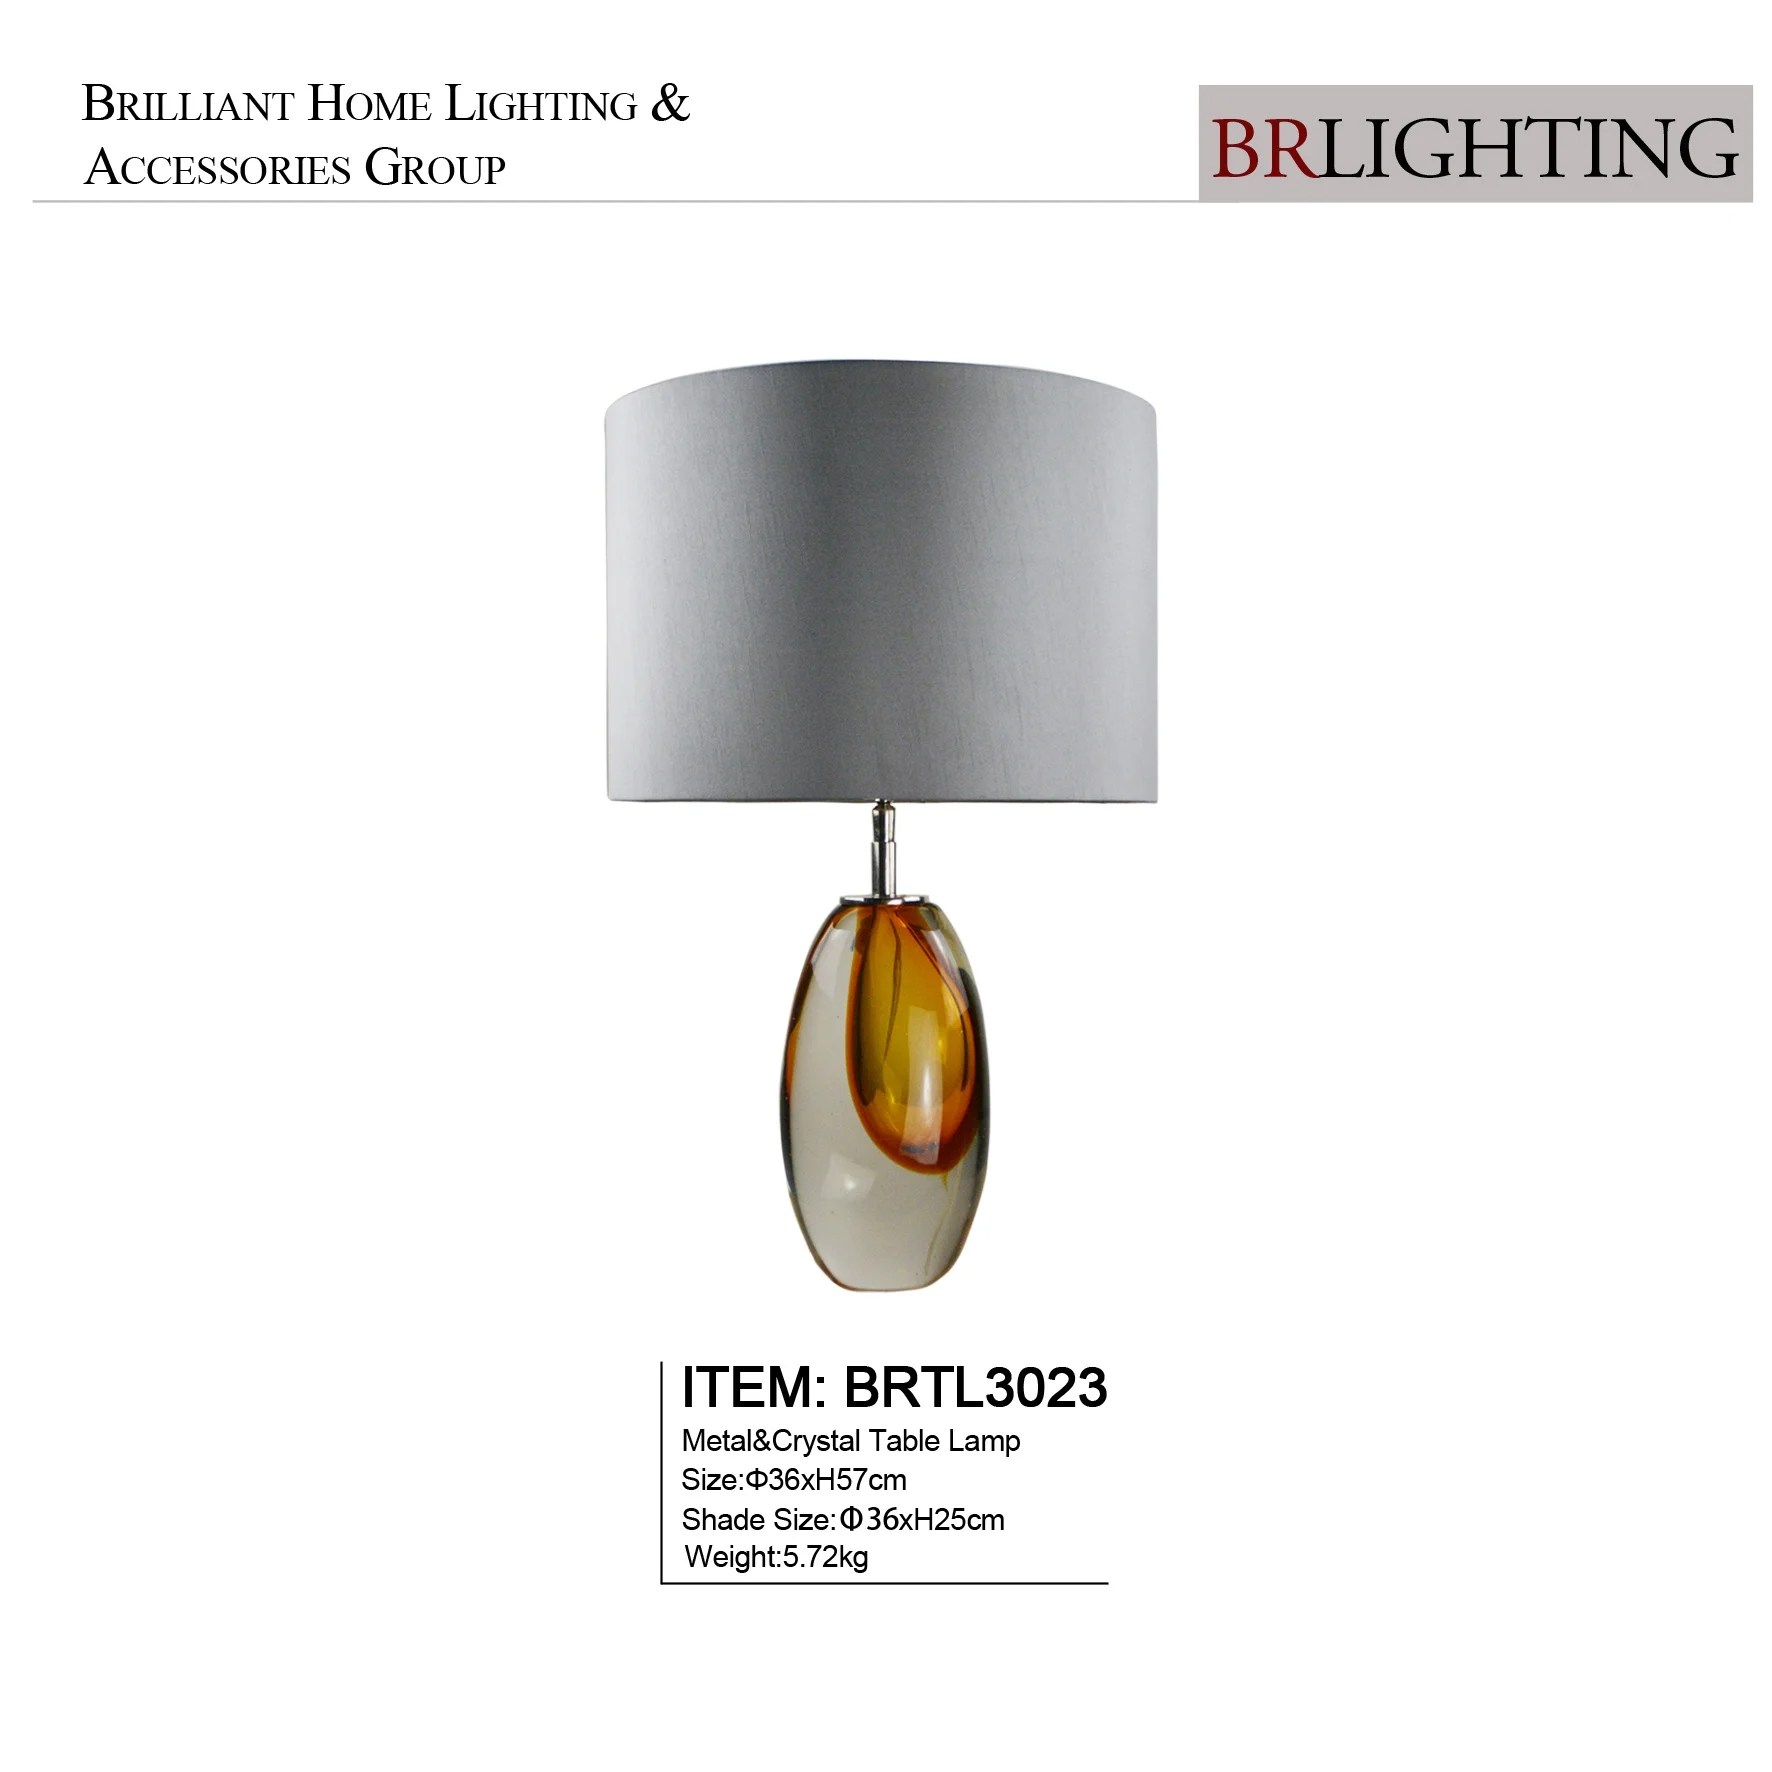 Unique Design Crystal Hand Blown Glass Table Lamp in Amber with Gray Lampshade Murano Glass Table lamps for Bedroom